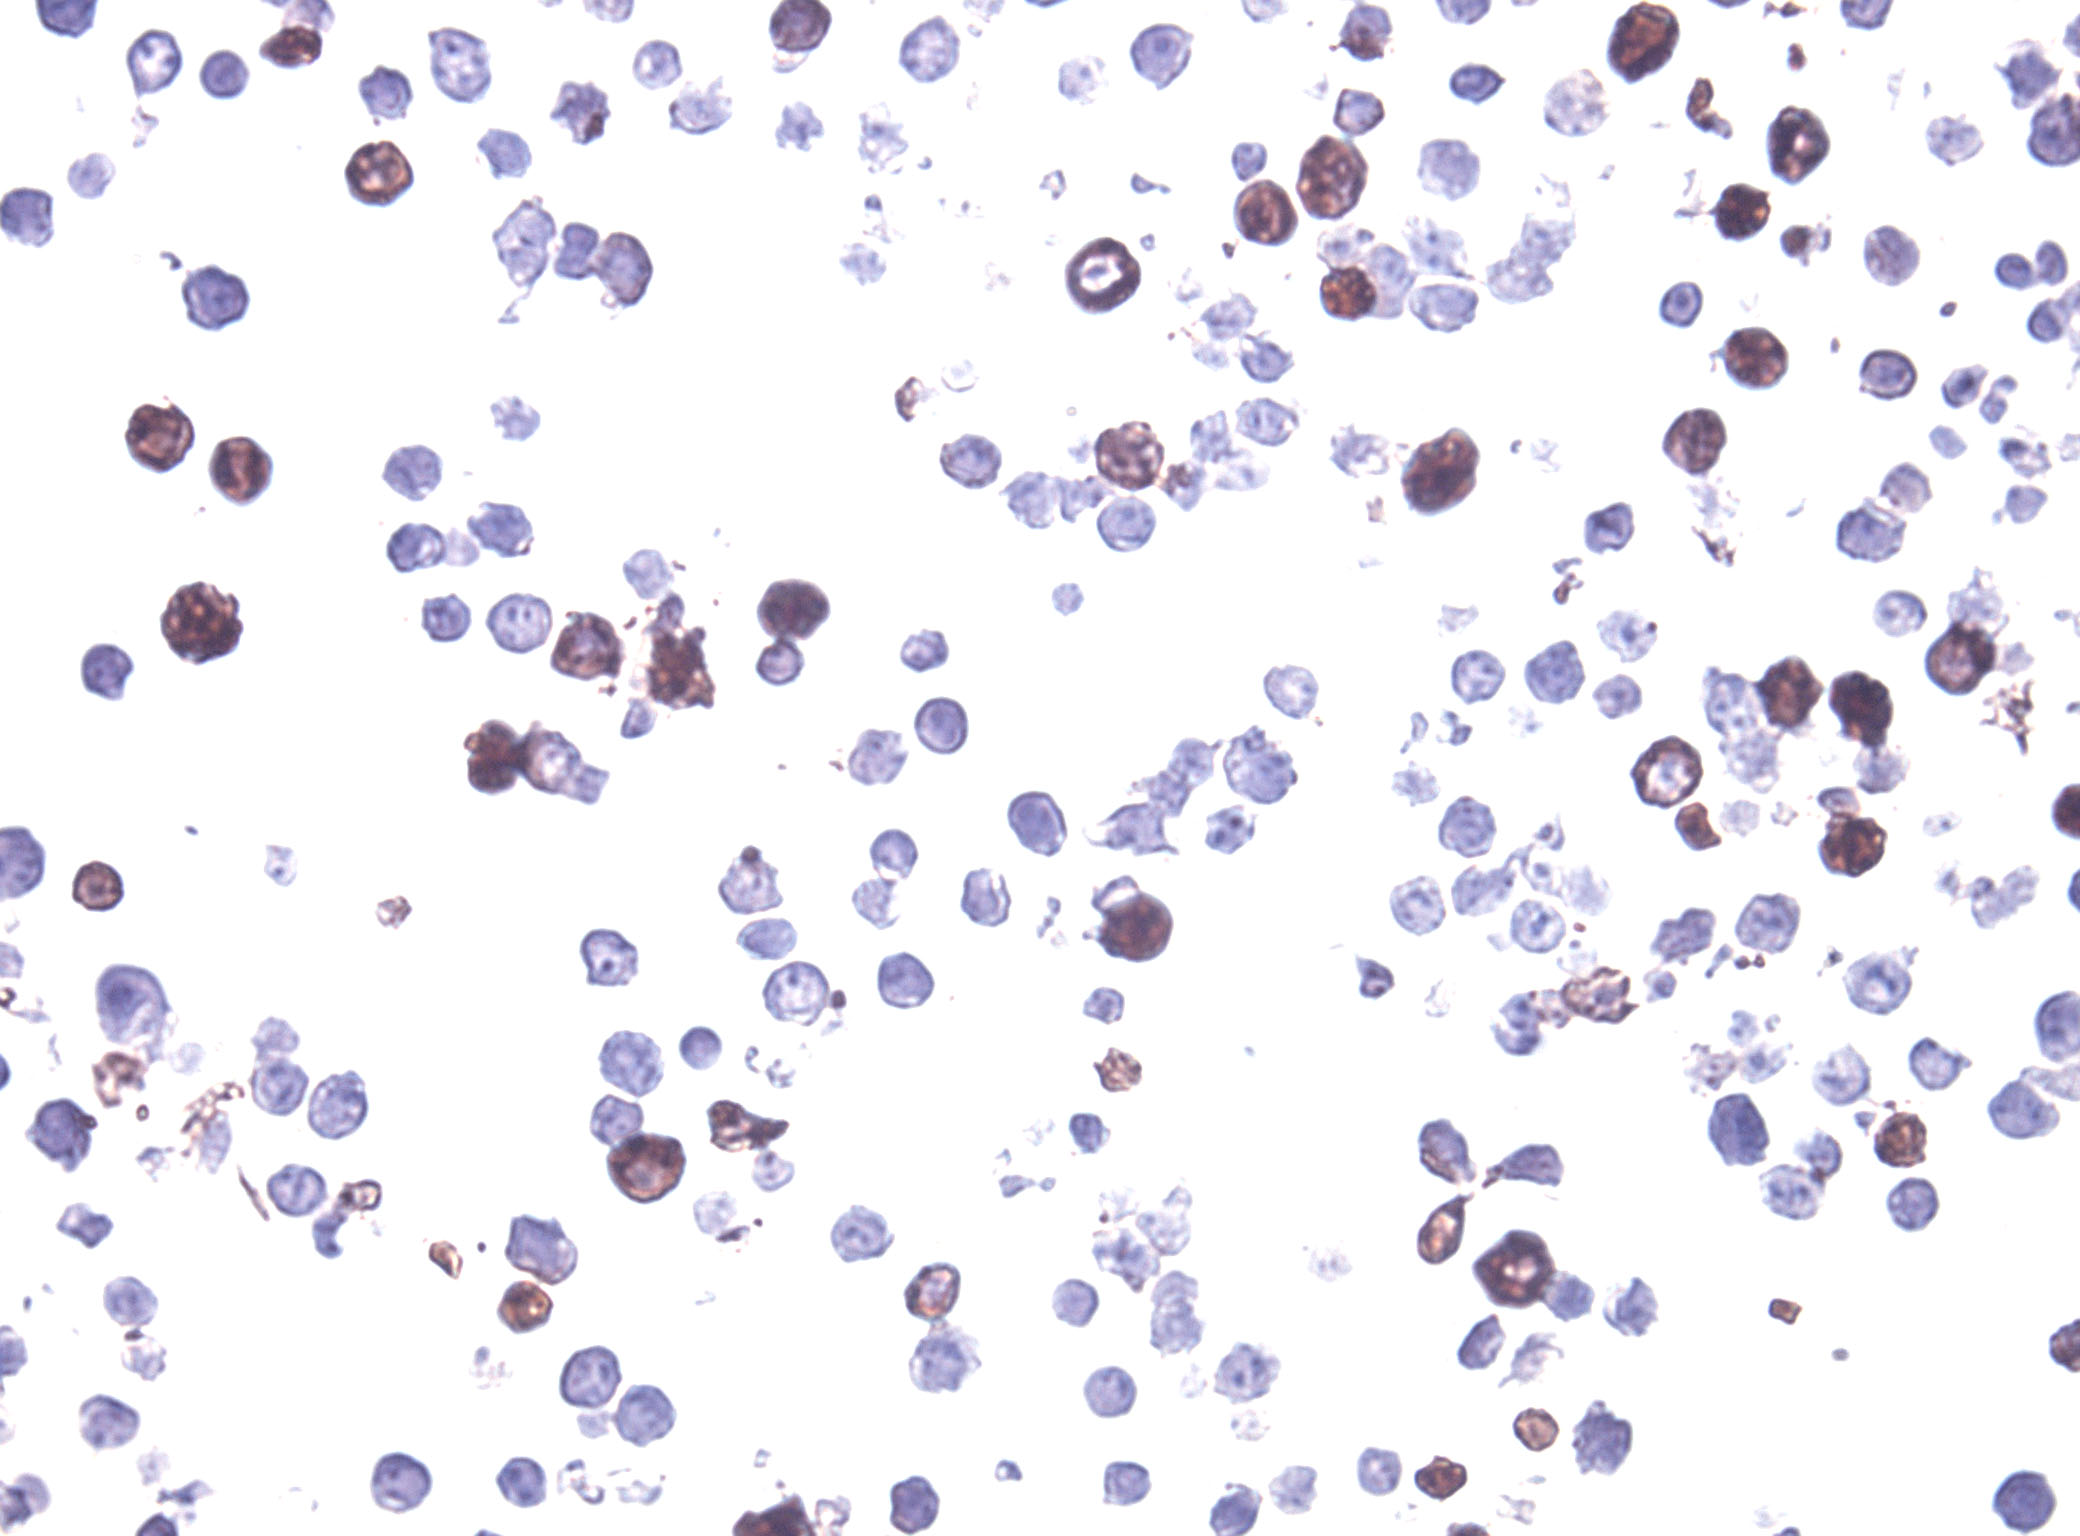 Immunohistology staining on LY6K overexpressed cytosection TS412498P5 with mouse anti DDK clone OTI11C3 C/N TA180144 at 1:400 dilution 4C O/N. Antibody staining was achieved with HIER Citrate pH6 , Polink1 with DAB chromogen detection kit (D11-18). Positive stain shown with the brown chromogen present. HEK293T cells were transfected with cDNA clone RC212498, 5 micron sections, 40x magnification